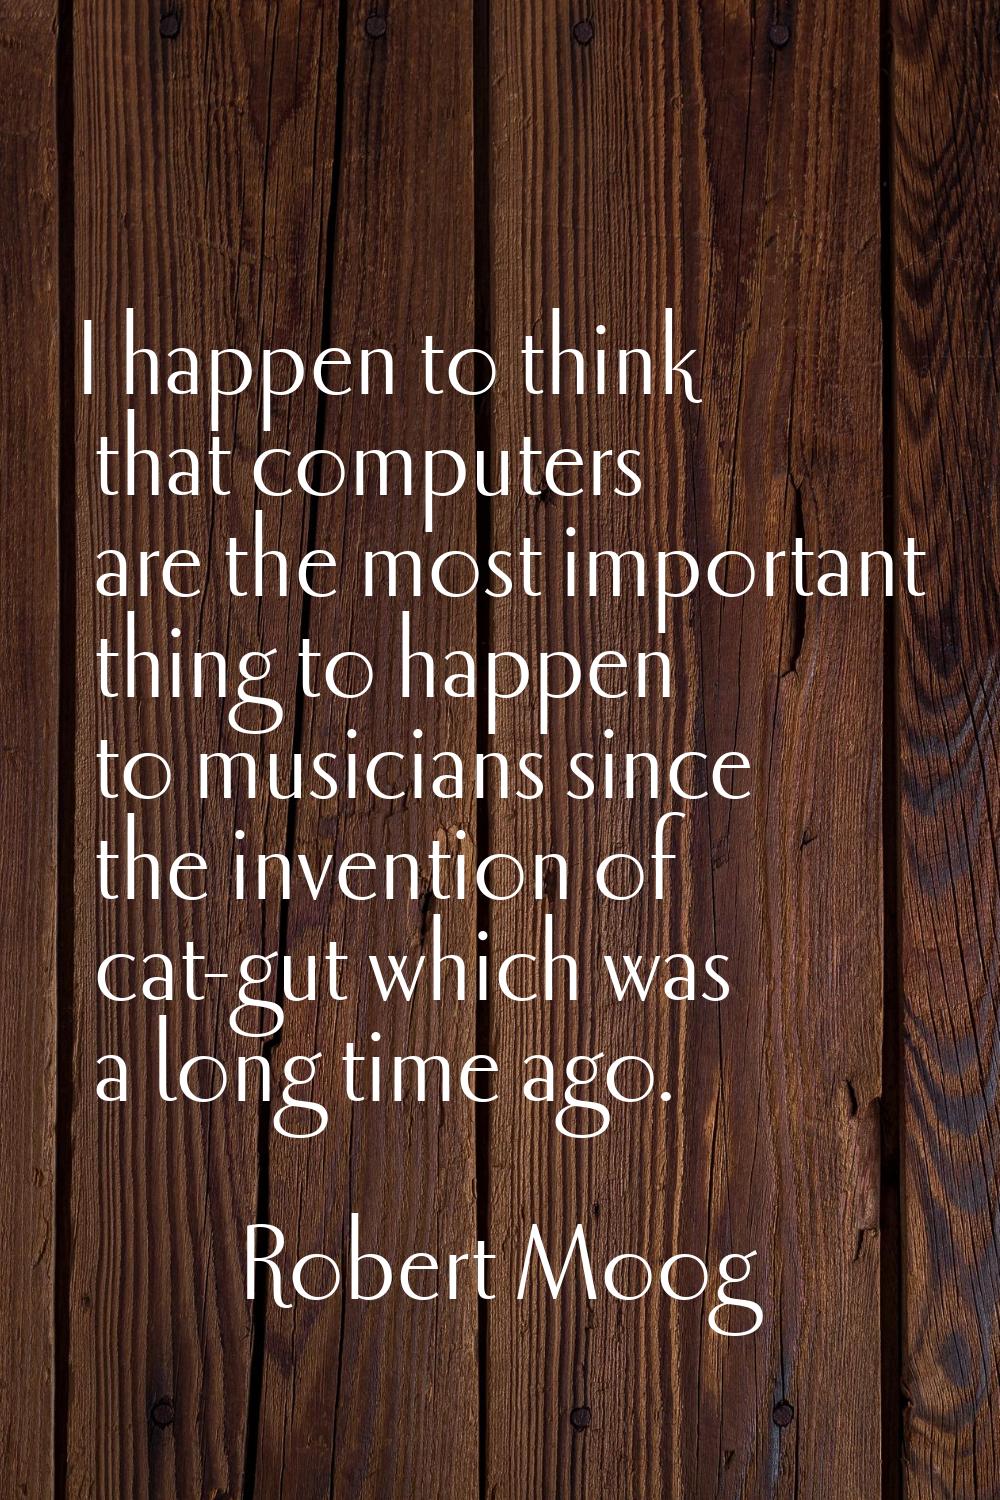 I happen to think that computers are the most important thing to happen to musicians since the inve